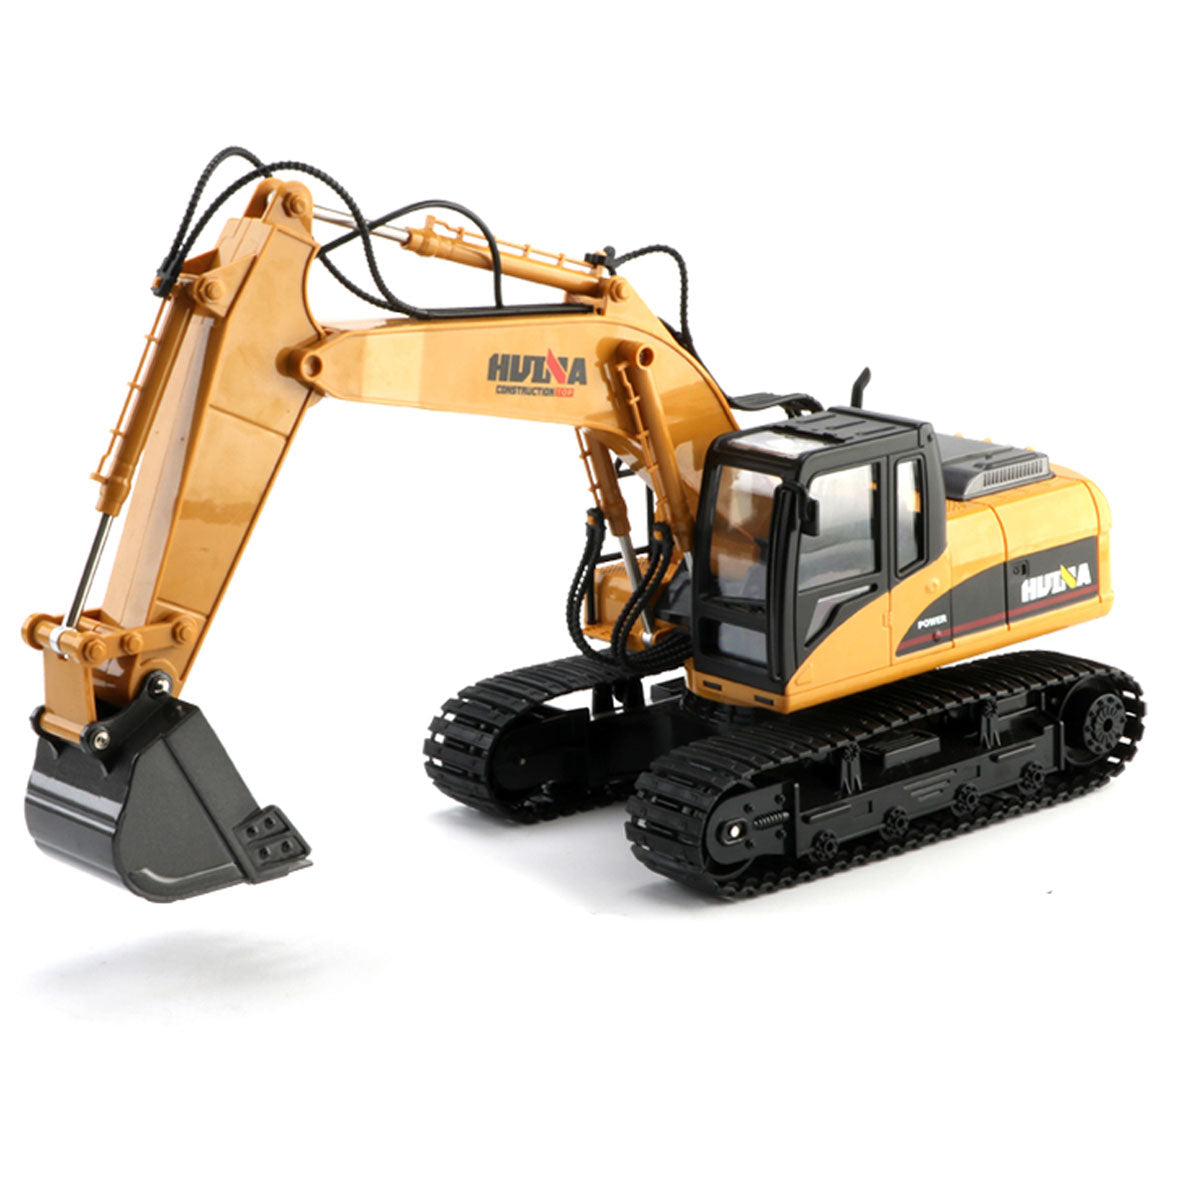 HUINA 1/14 15CH RC Alloy Excavator Construction Engineering Vehicle Digger Toy Gift